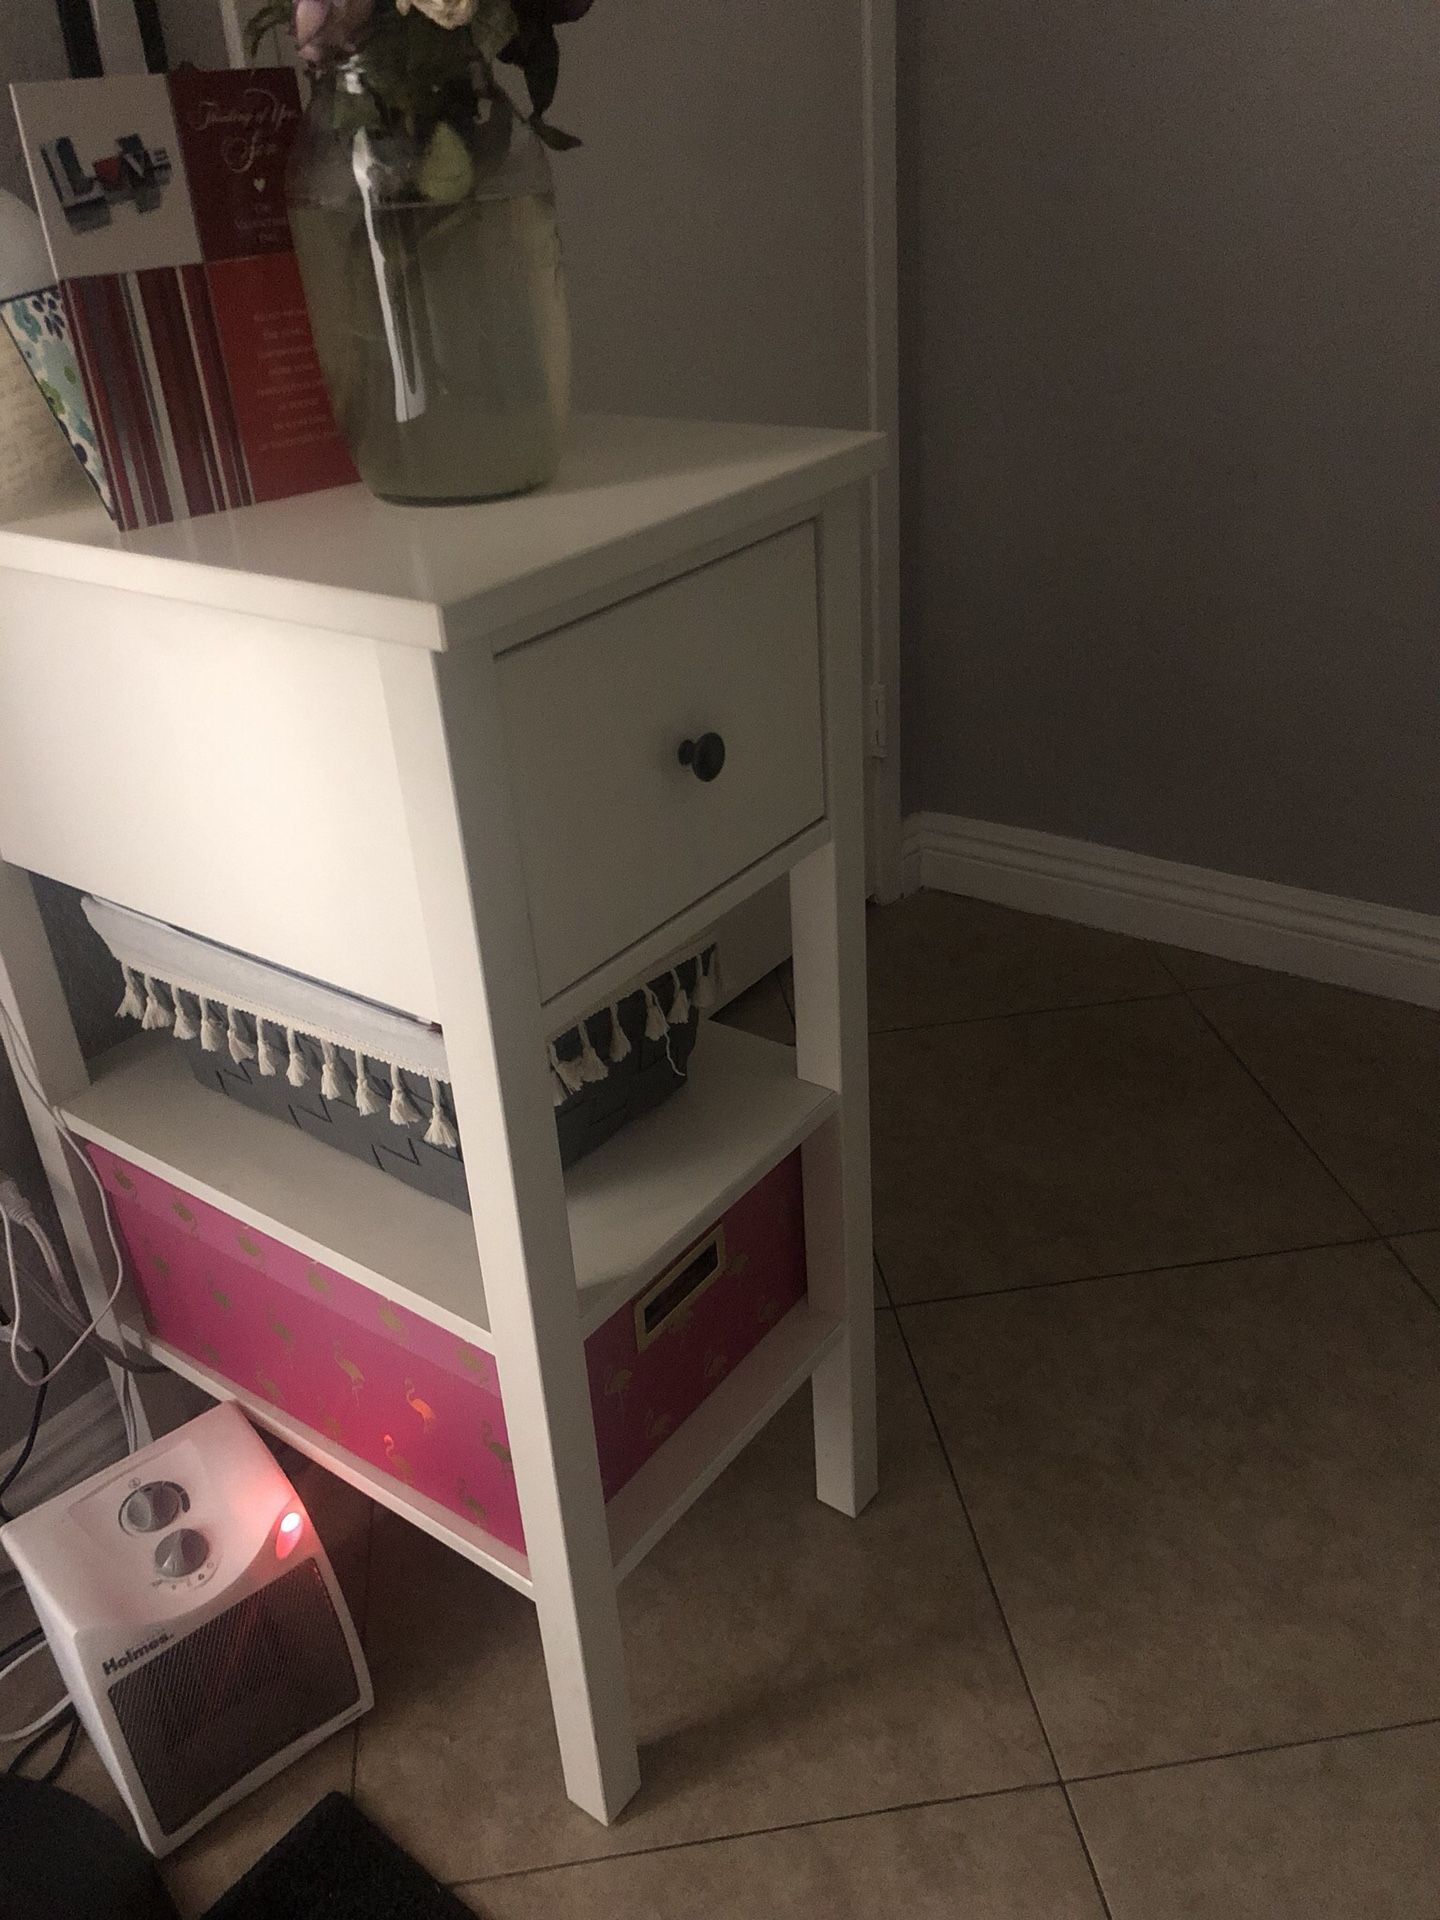 Bedside table from Target